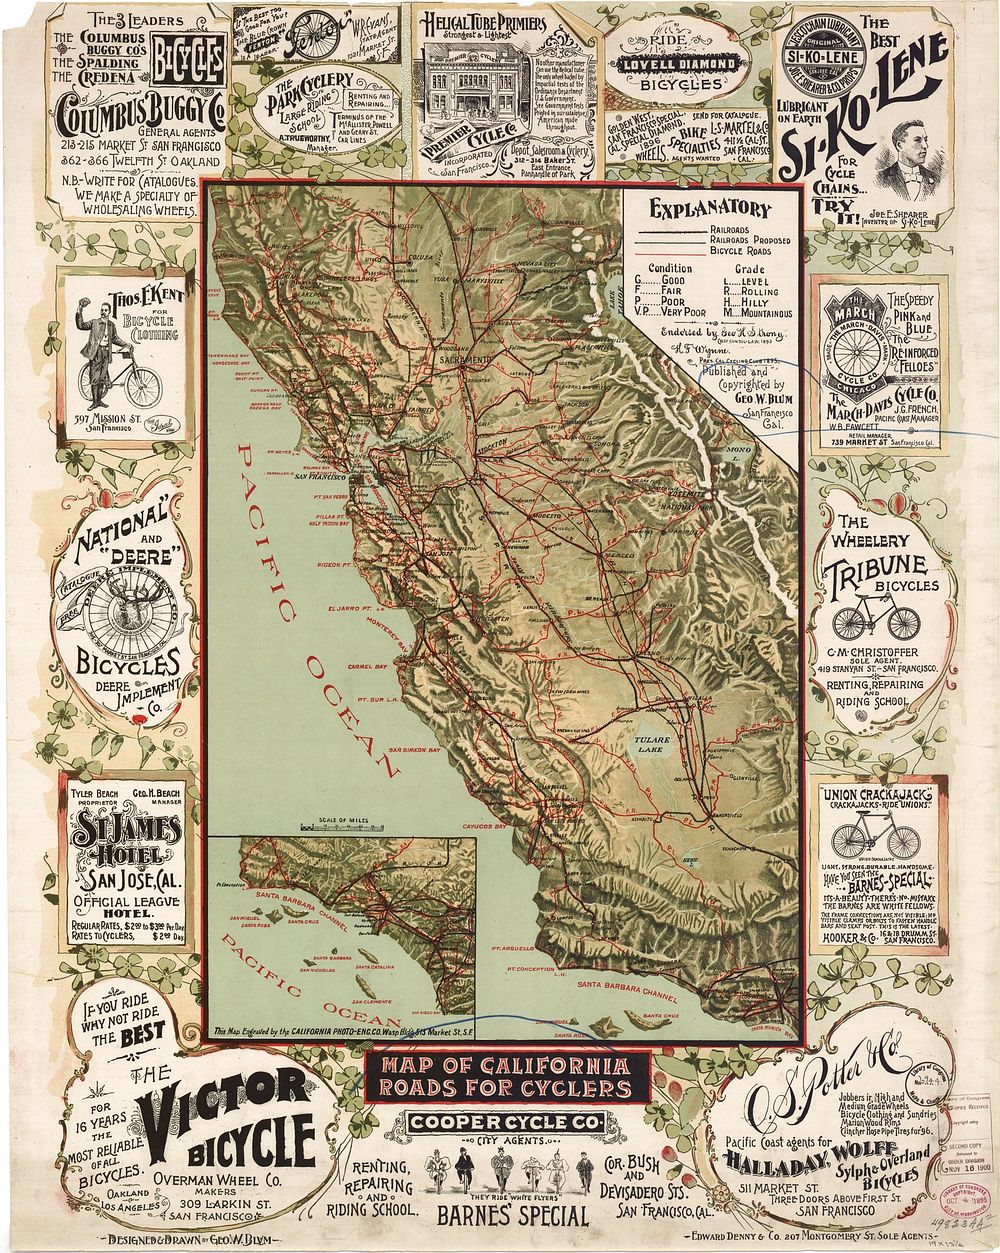 Map of California roads for cyclers.